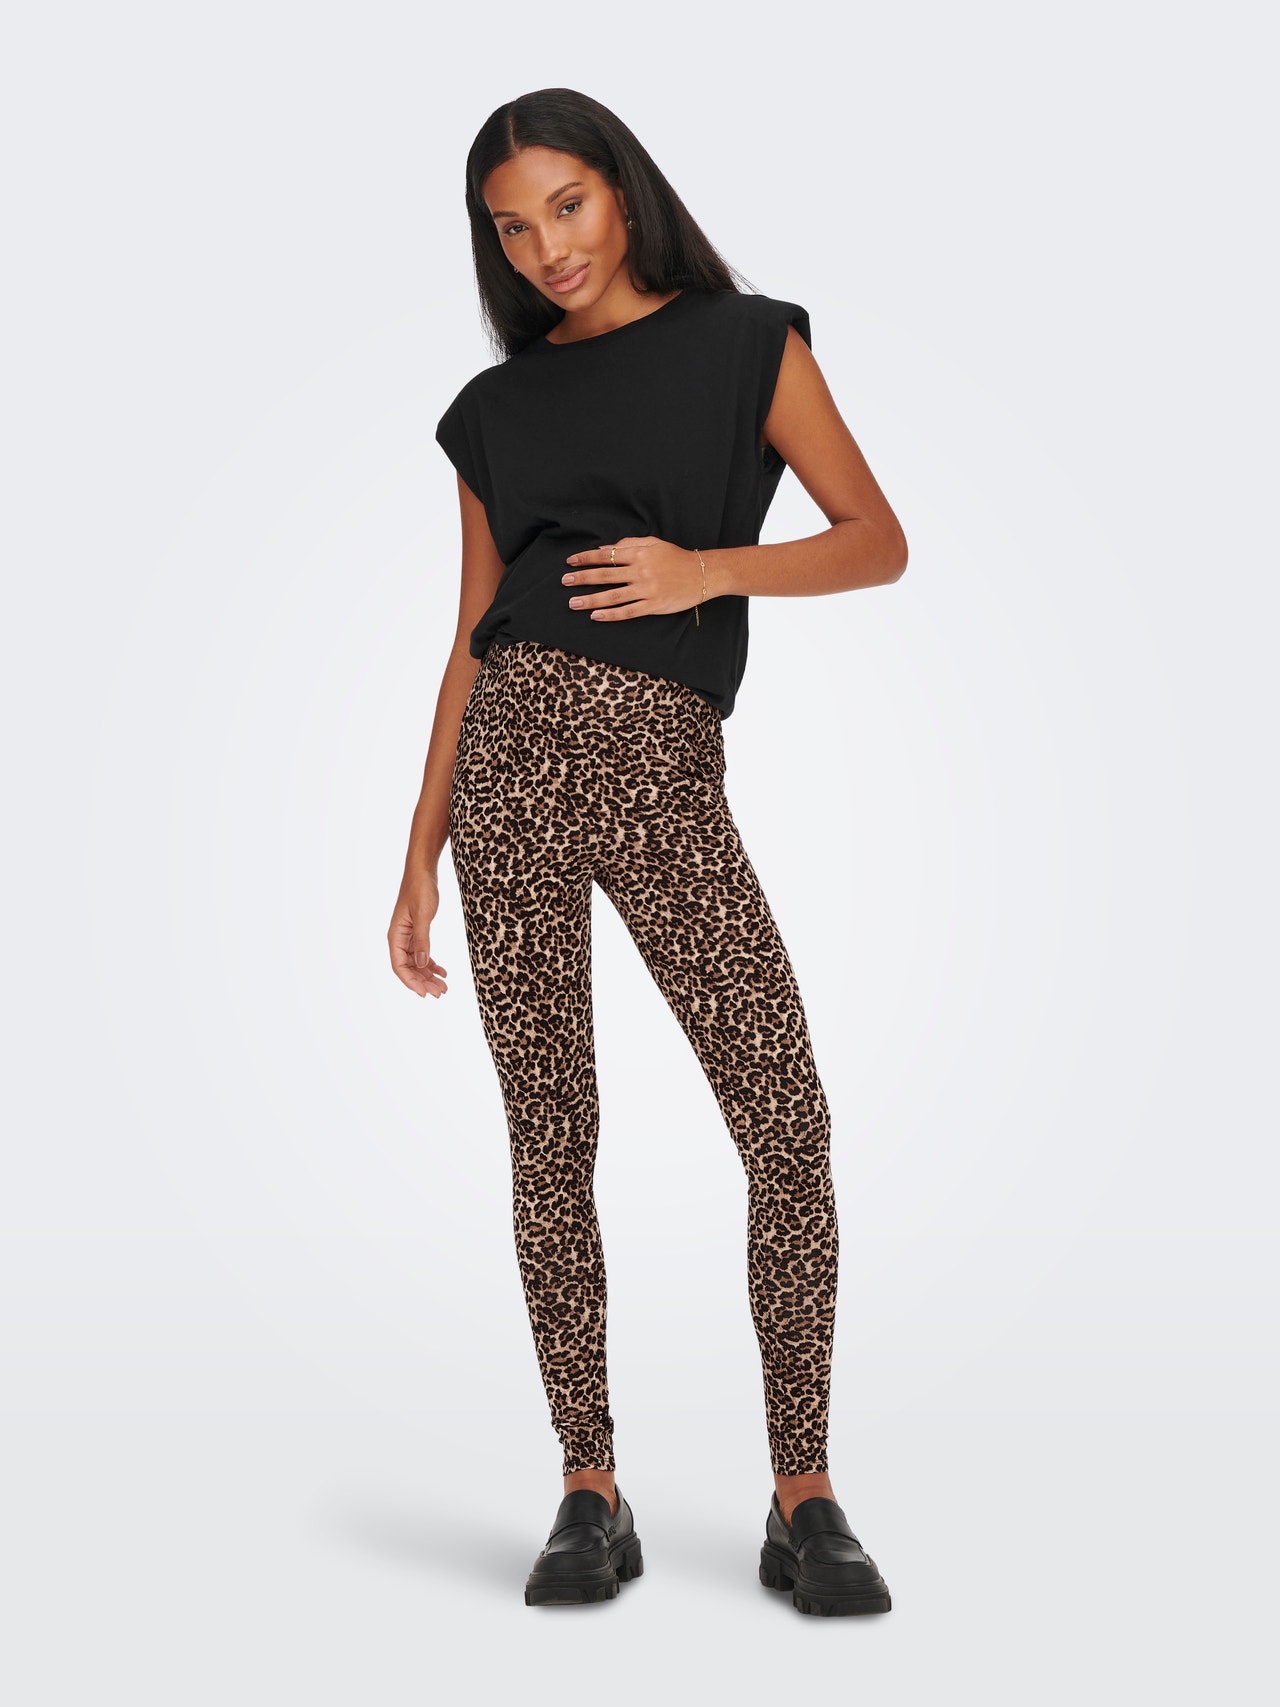 https://images.only.com/15247224/4119572/005/only-mamaleopardprintedleggings-black.jpg?v=f5a0dd791edcb94719e8a06f6a7a460b&format=webp&width=1280&quality=90&key=25-0-3